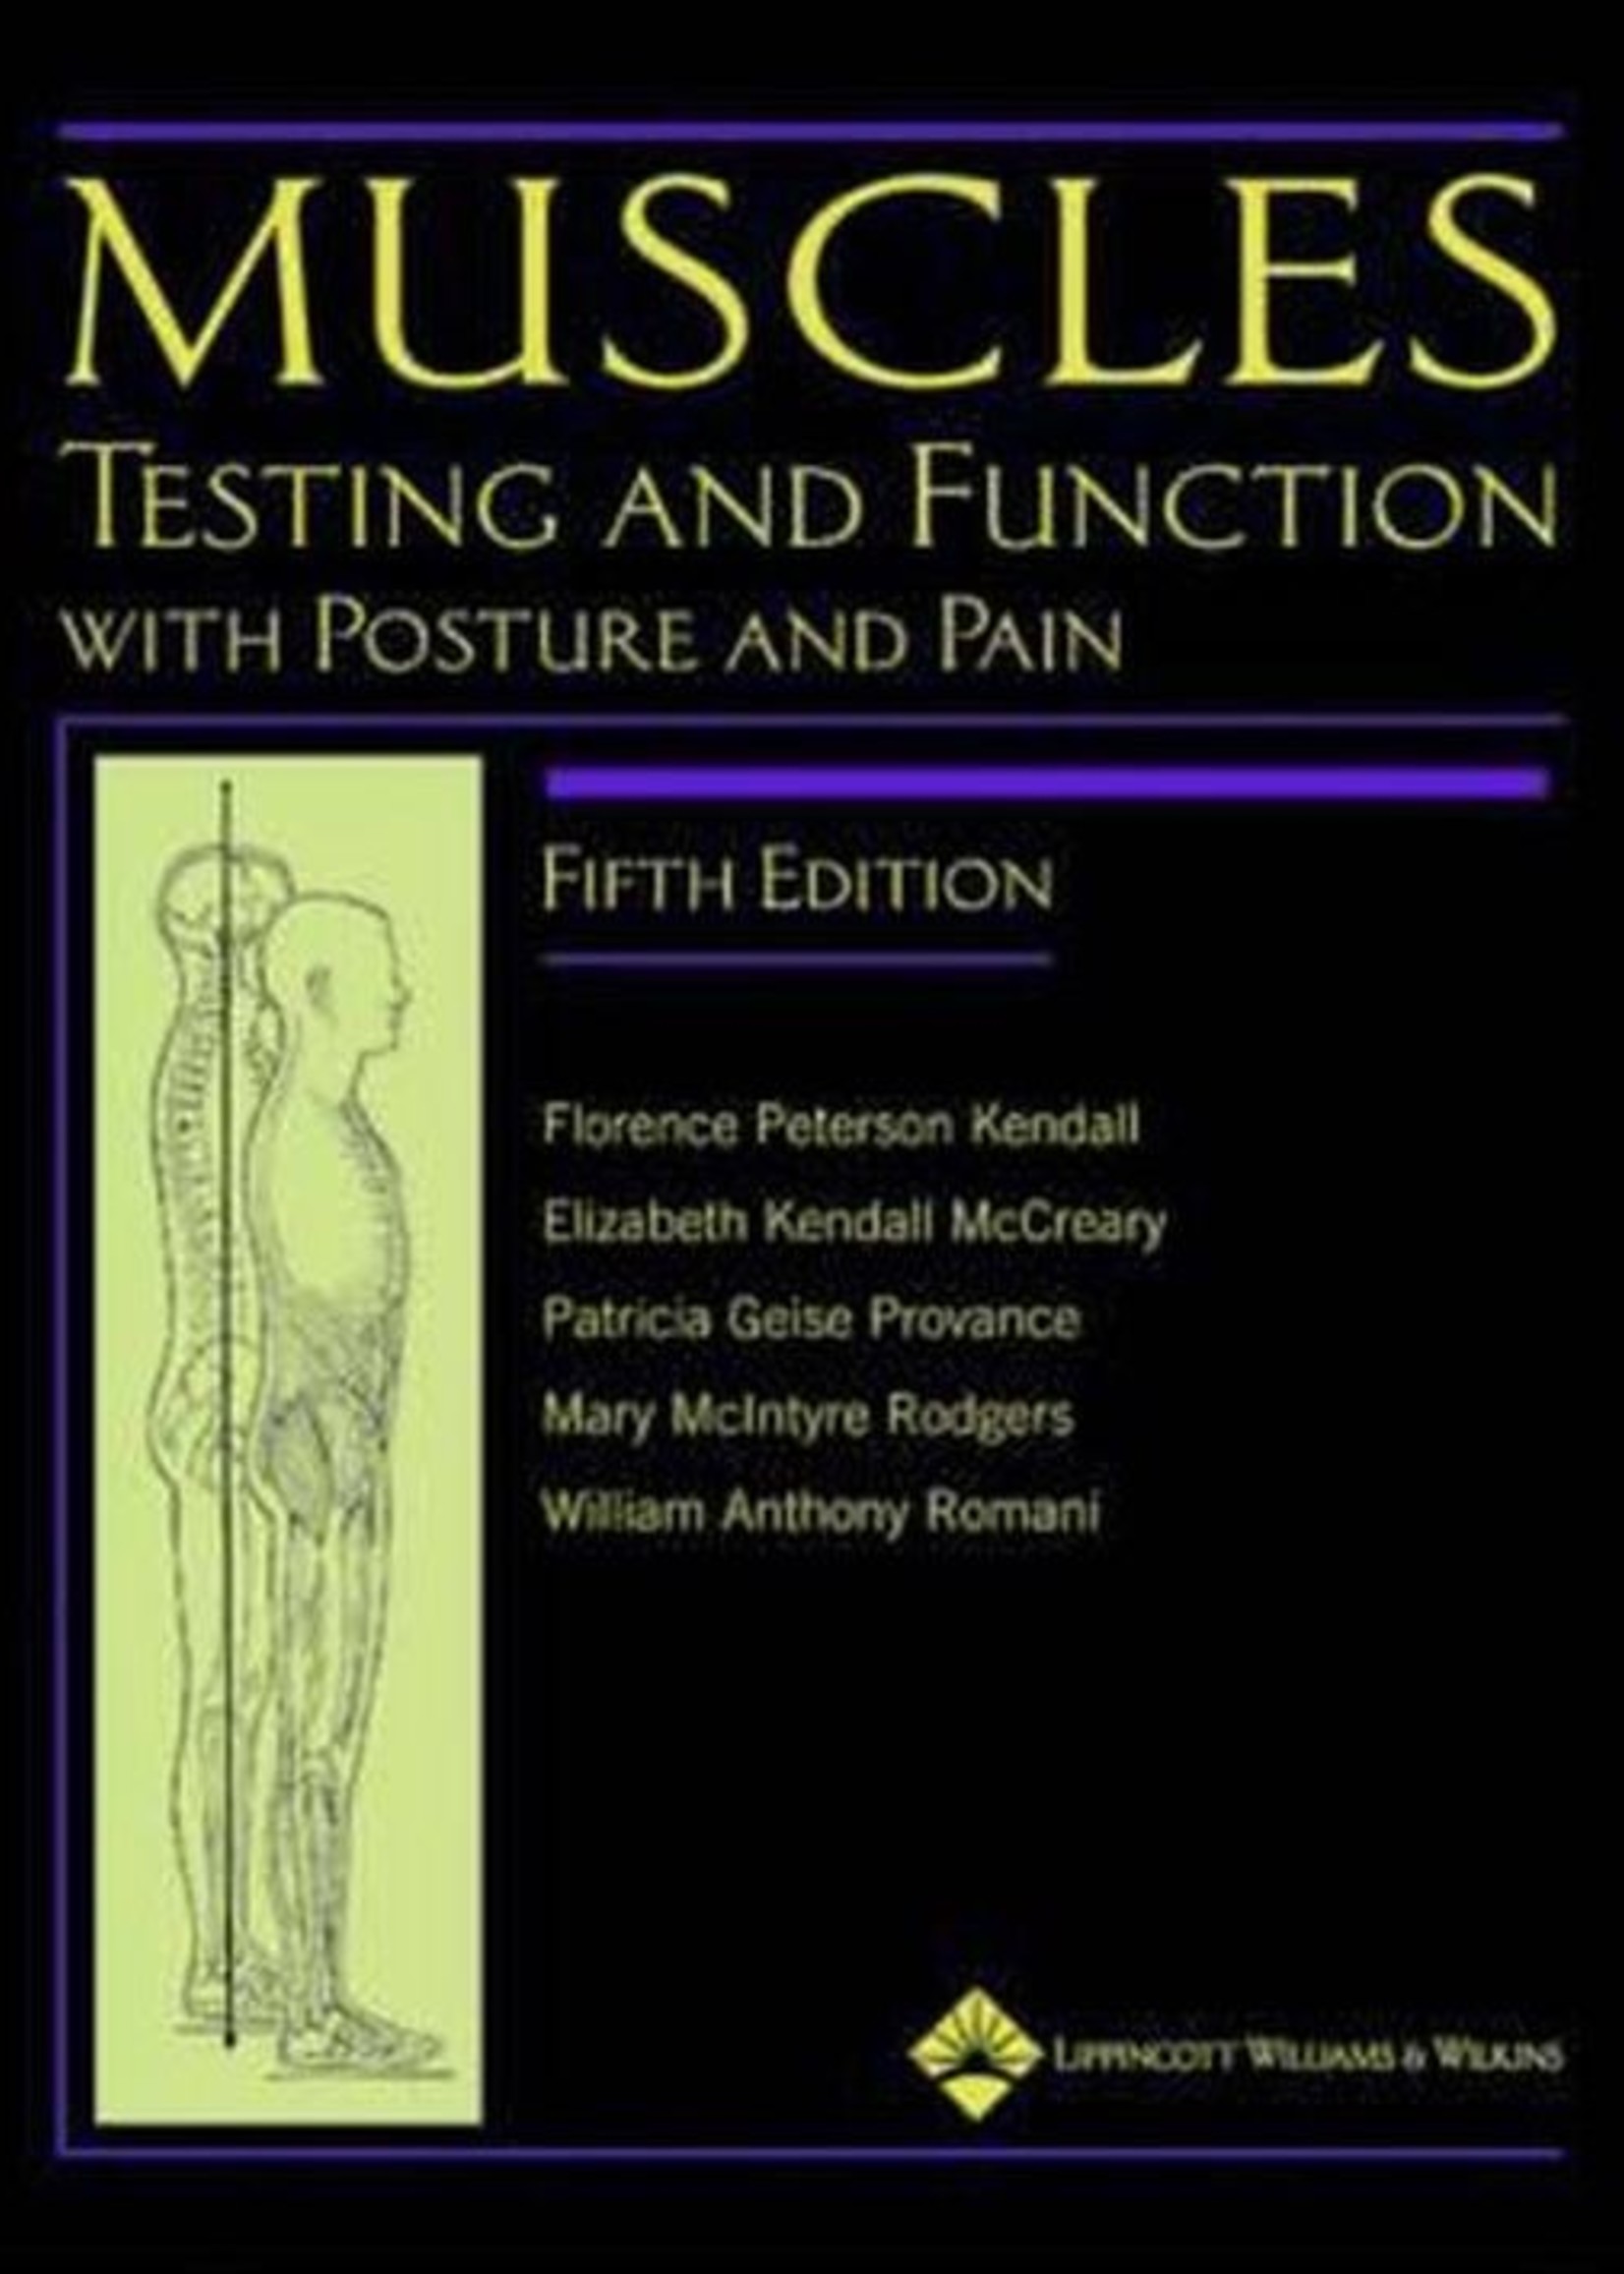 LWW Muscles, testing and function with posture and pain, 5th edition